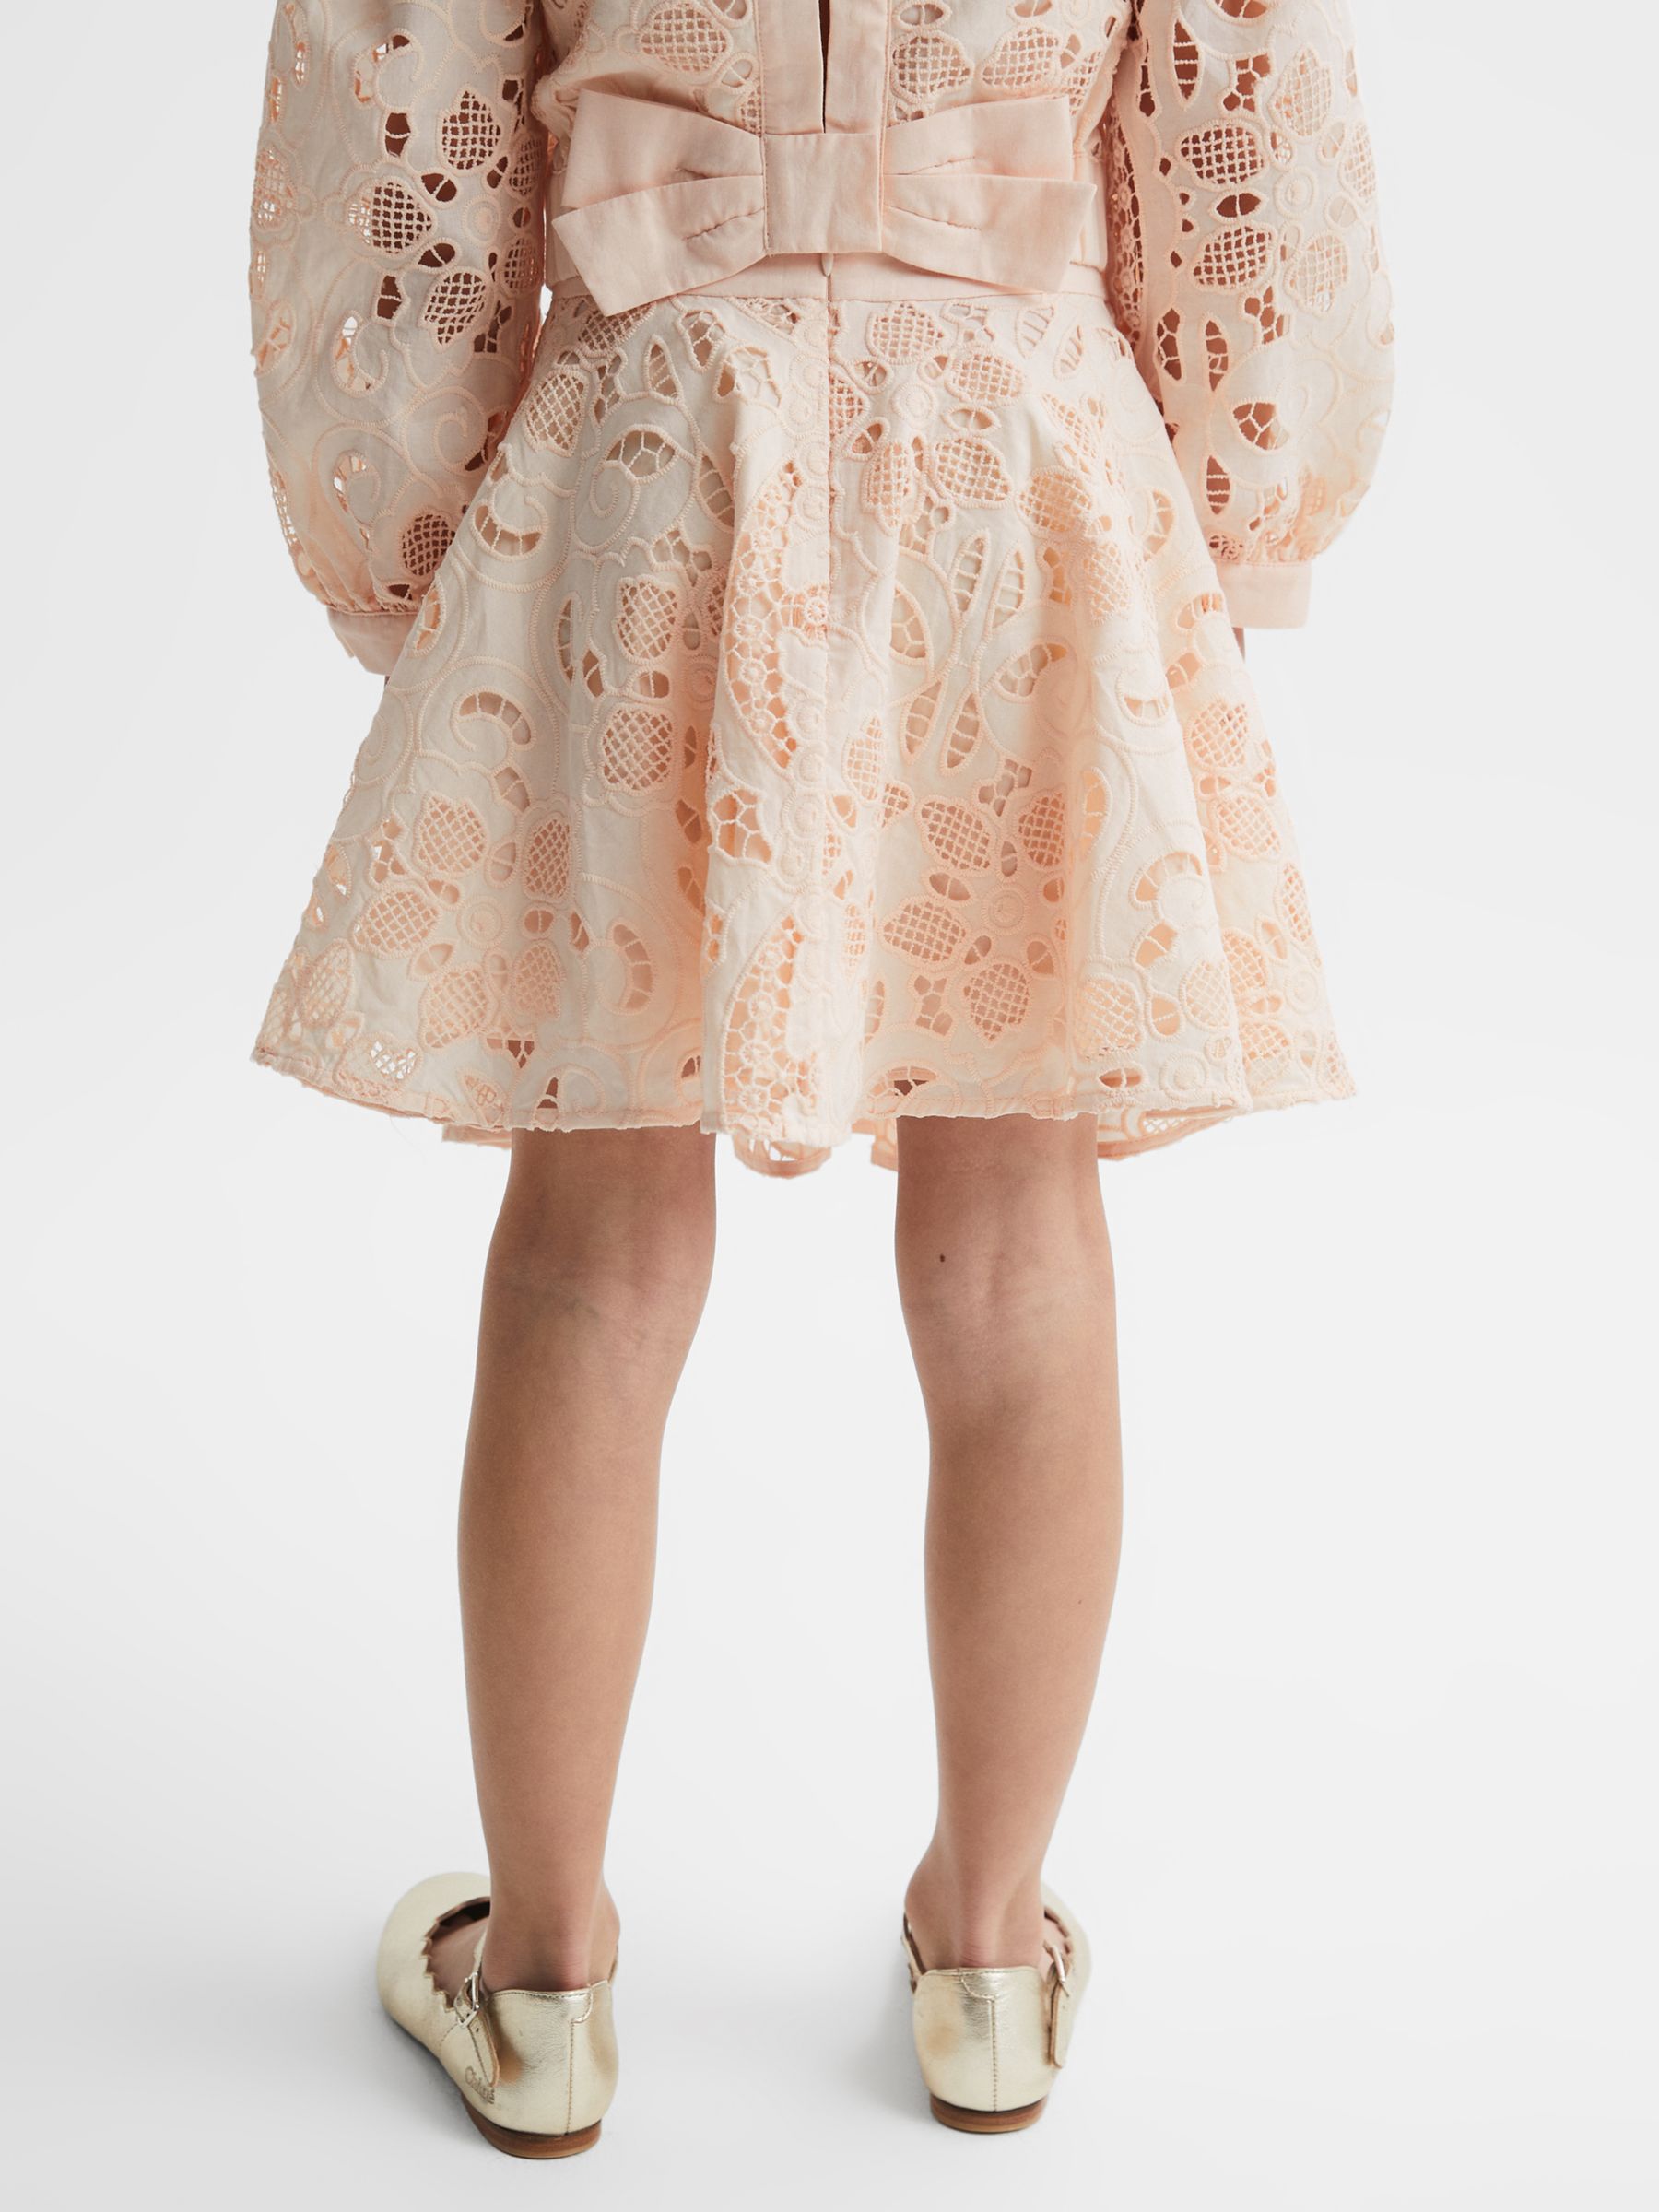 Buy Reiss Kids' Nella Cotton Lace Mini Skirt, Pink Online at johnlewis.com